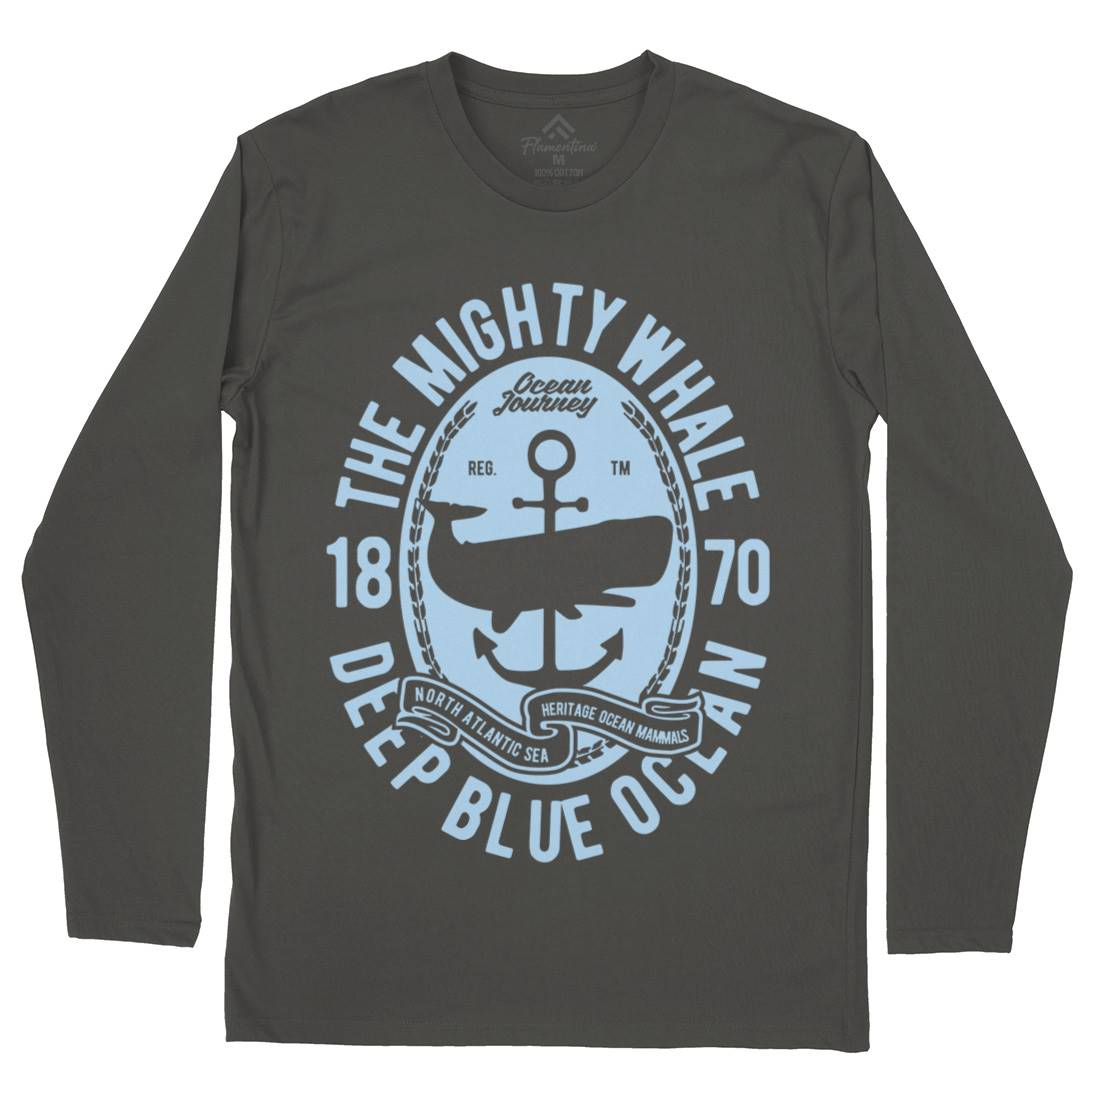 The Mighty Whale Mens Long Sleeve T-Shirt Navy B466